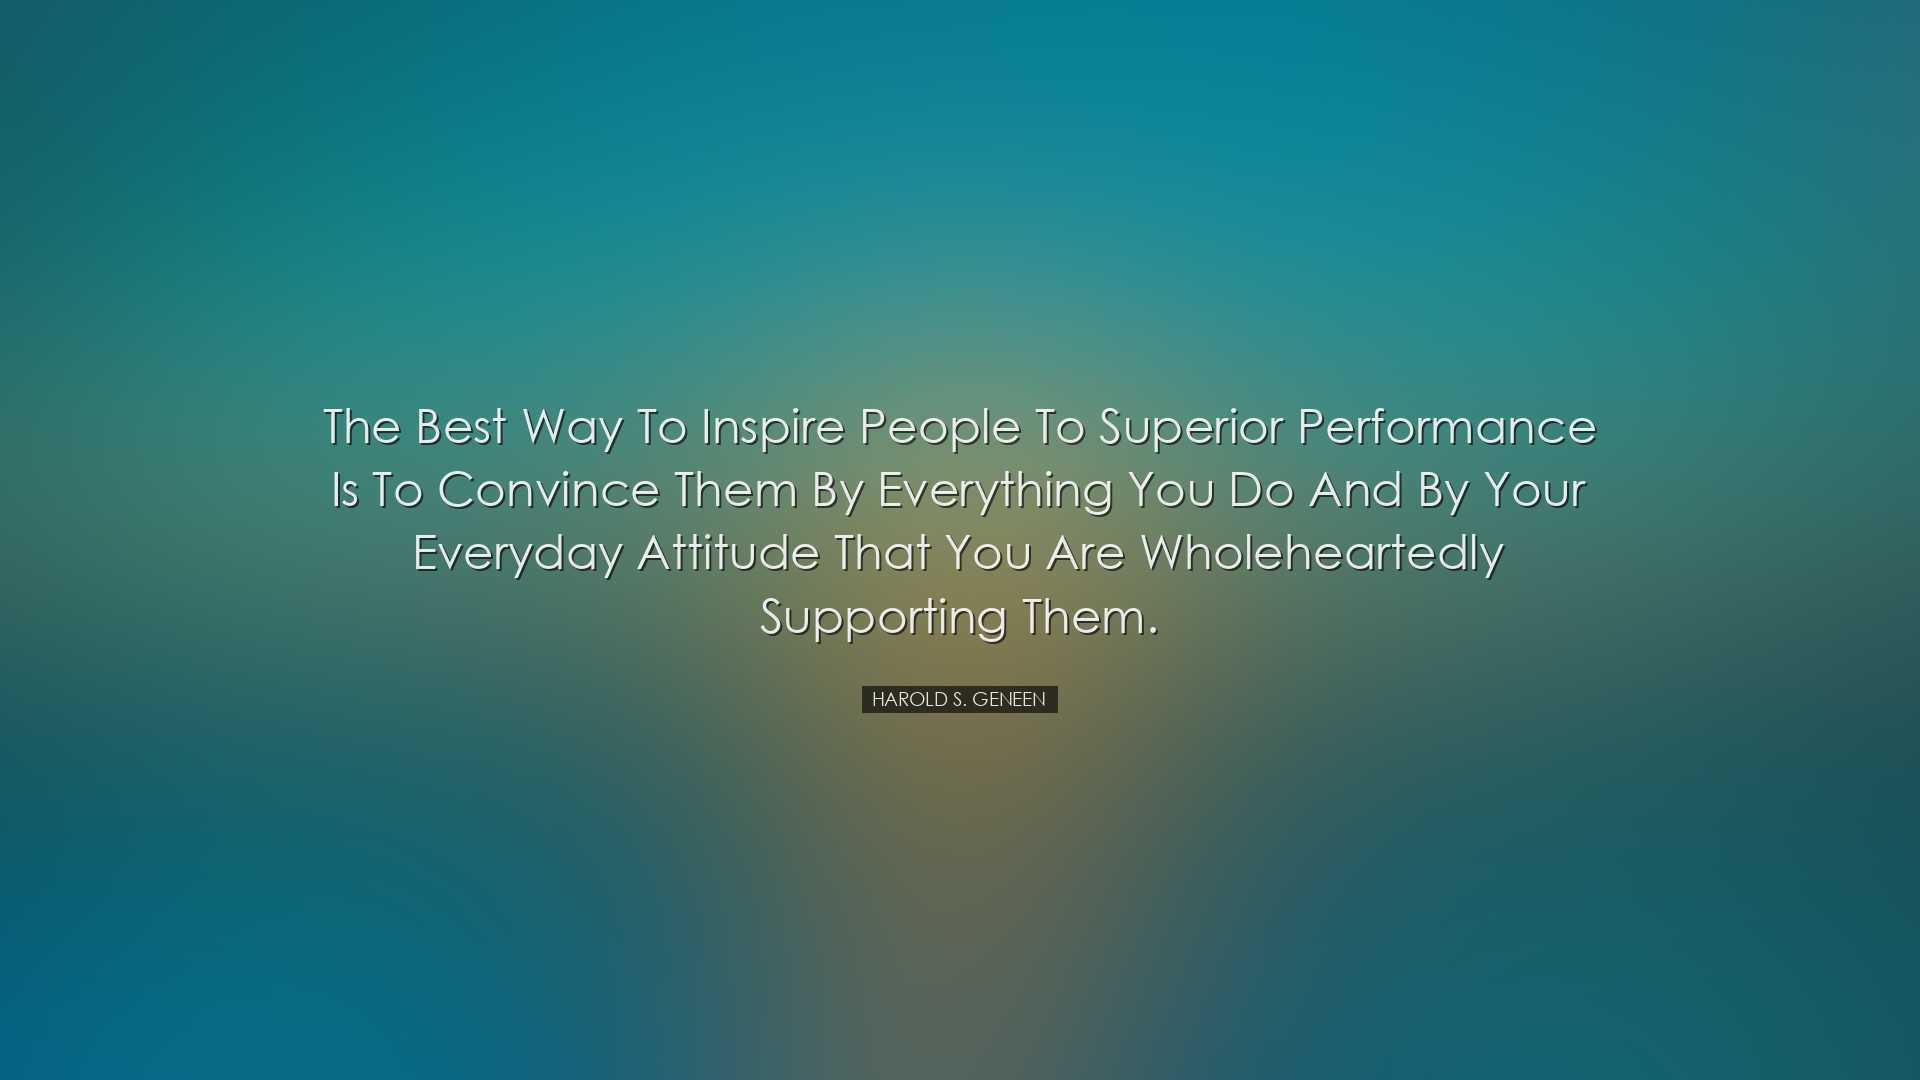 The best way to inspire people to superior performance is to convi